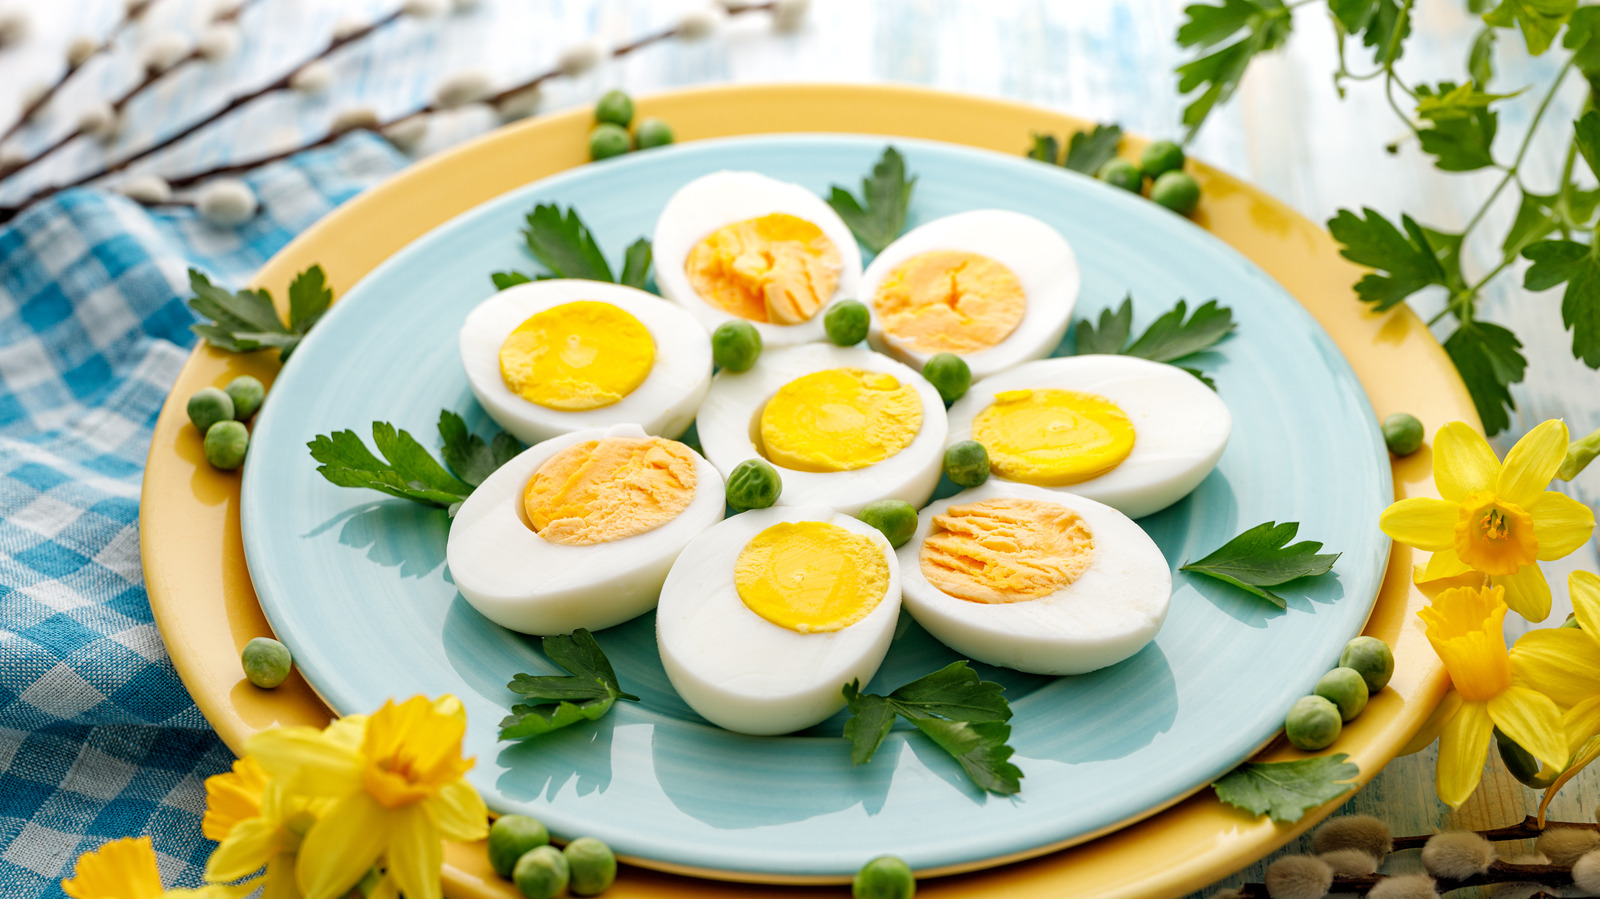 To Know How ️ Romantic You Are, Pick Unpopular Foods to… Quiz Halves,Of,Boiled,Eggs,On,A,Blue,Plate,,Close,Up